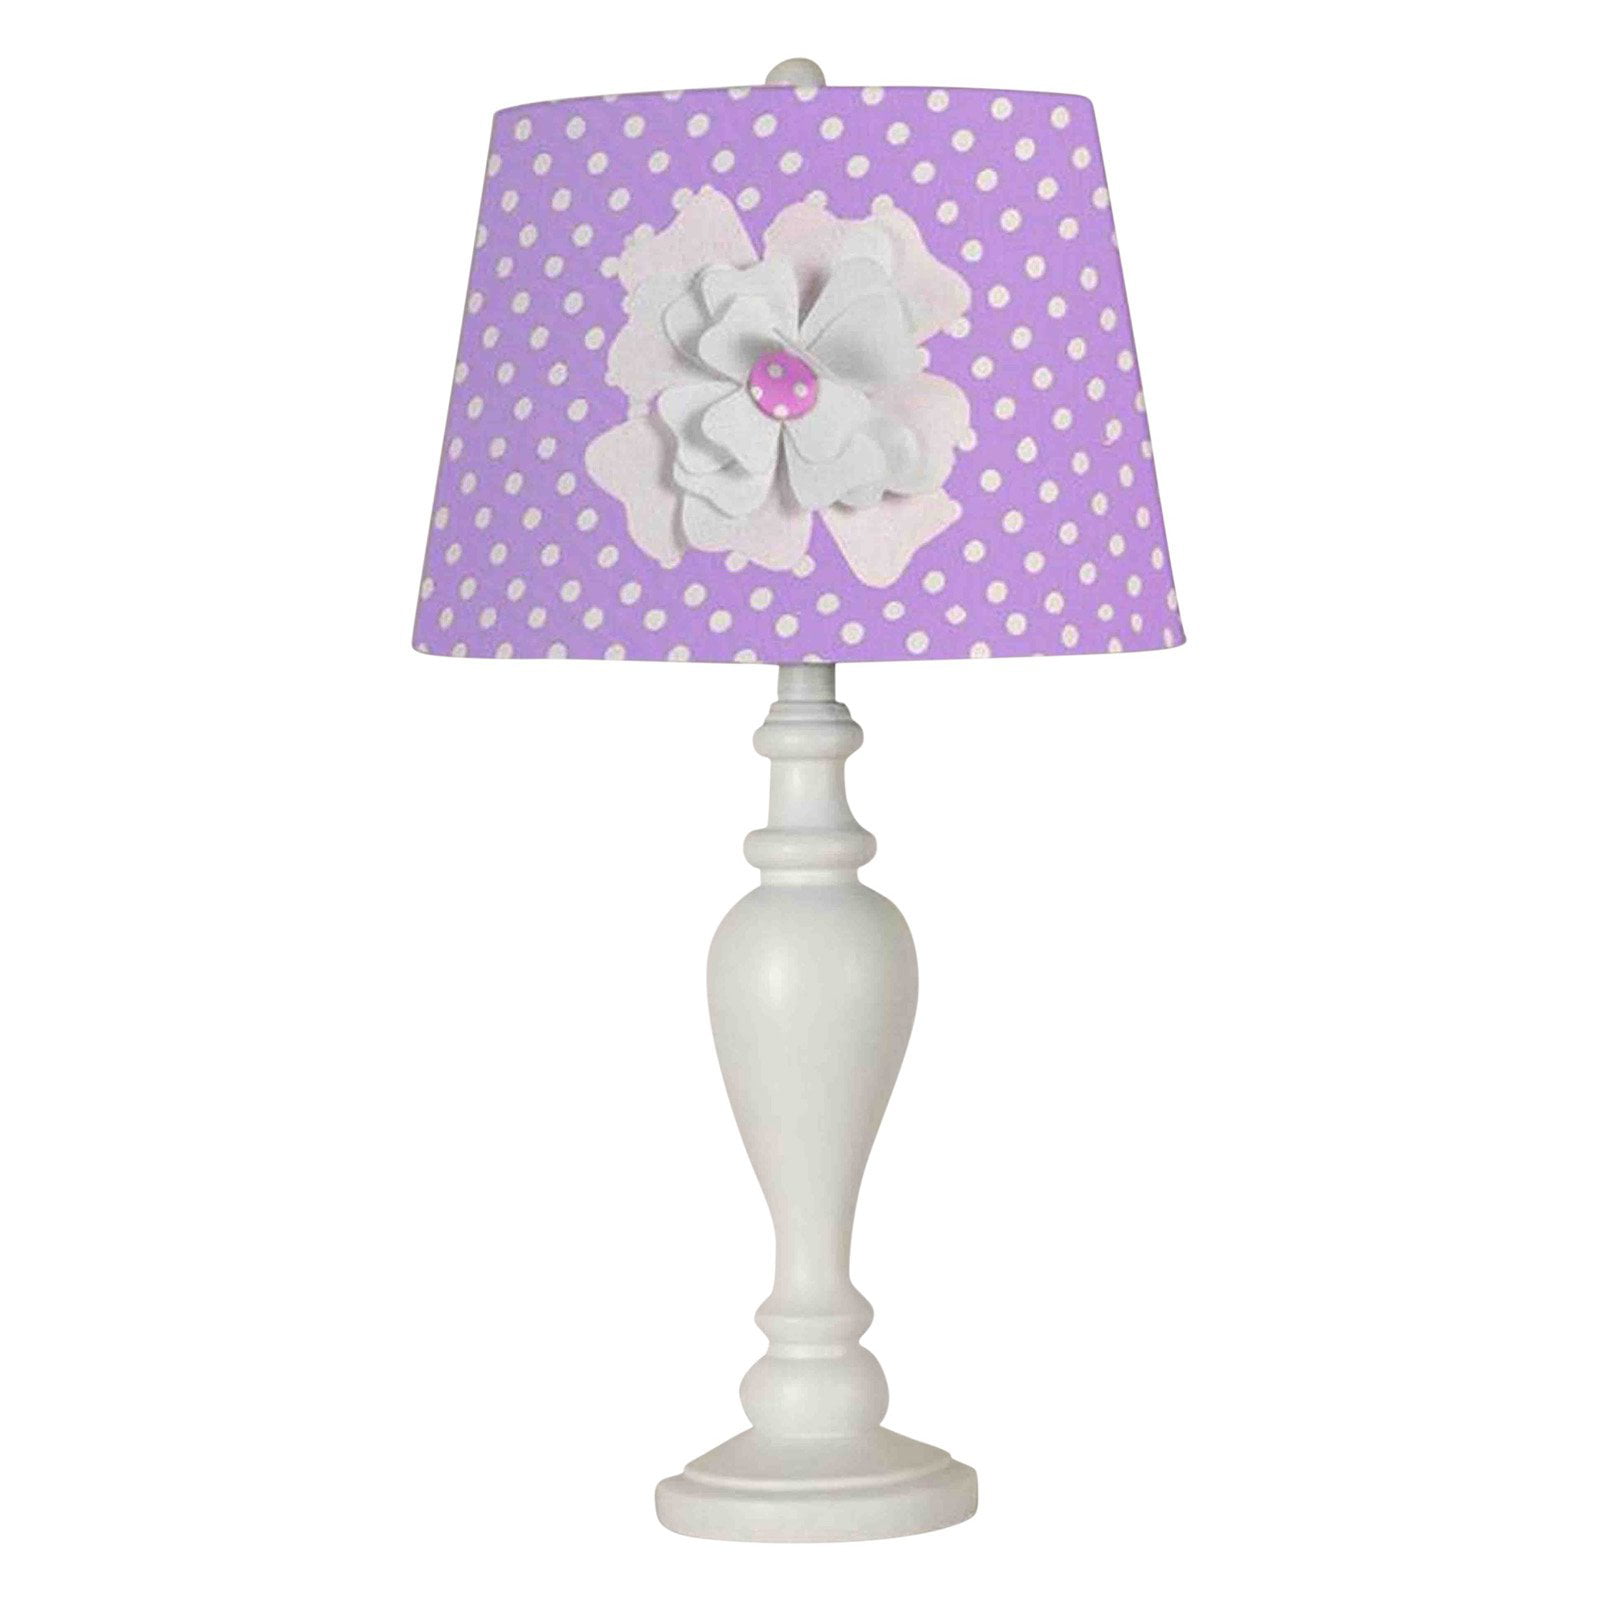 24.5" Purple Shade with Flower Desk Lamp/Shade.Home, Office, Dorm, Kids